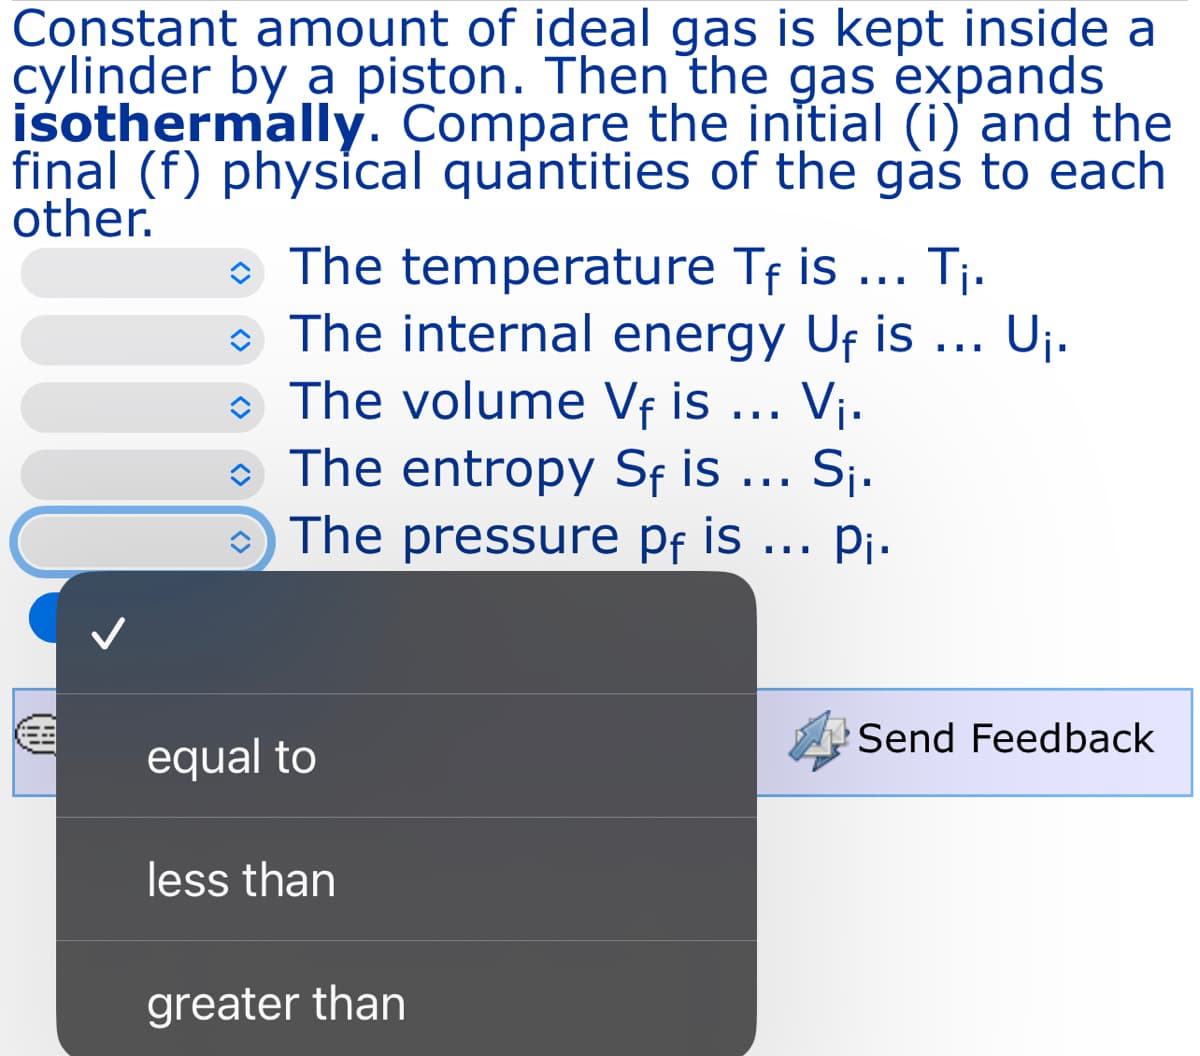 Constant amount of ideal gas is kept inside a
cylinder by a piston. Then the gas expands
isothermally. Compare the initial (i) and the
final (f) physical quantities of the gas to each
other.
◆ The temperature Tf is ... T₁.
The internal energy Uf is ... U₁.
The volume Vf is . V₁.
◆ The entropy Sf is ... S₁.
The pressure pf is ... P₁.
equal to
less than
greater than
Send Feedback